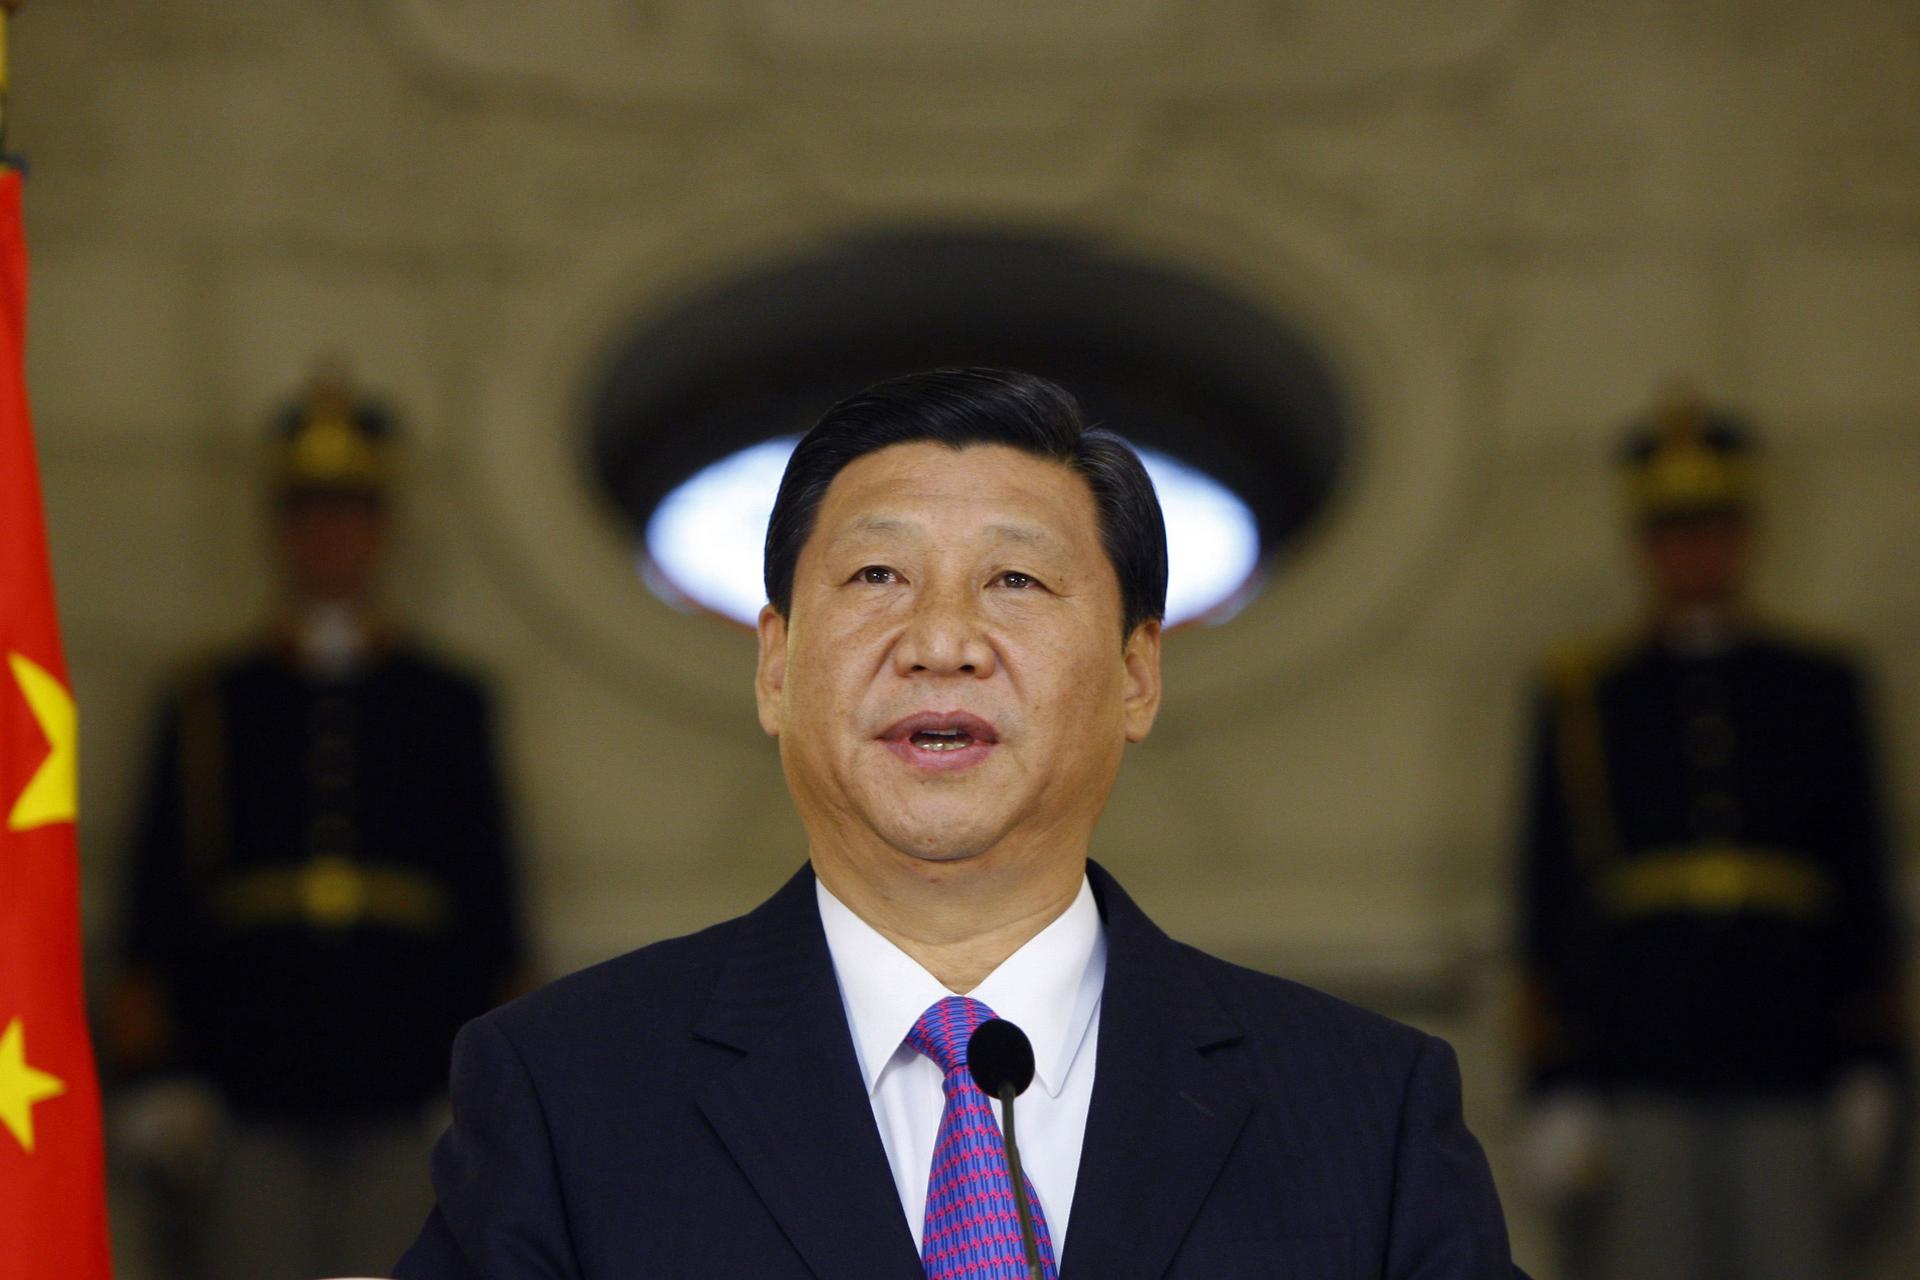 Only when the party does something about the lack of transparency in decision-making processes will we know Xi Jinping's anti-corruption drive really is changing things. Photo: Reuters